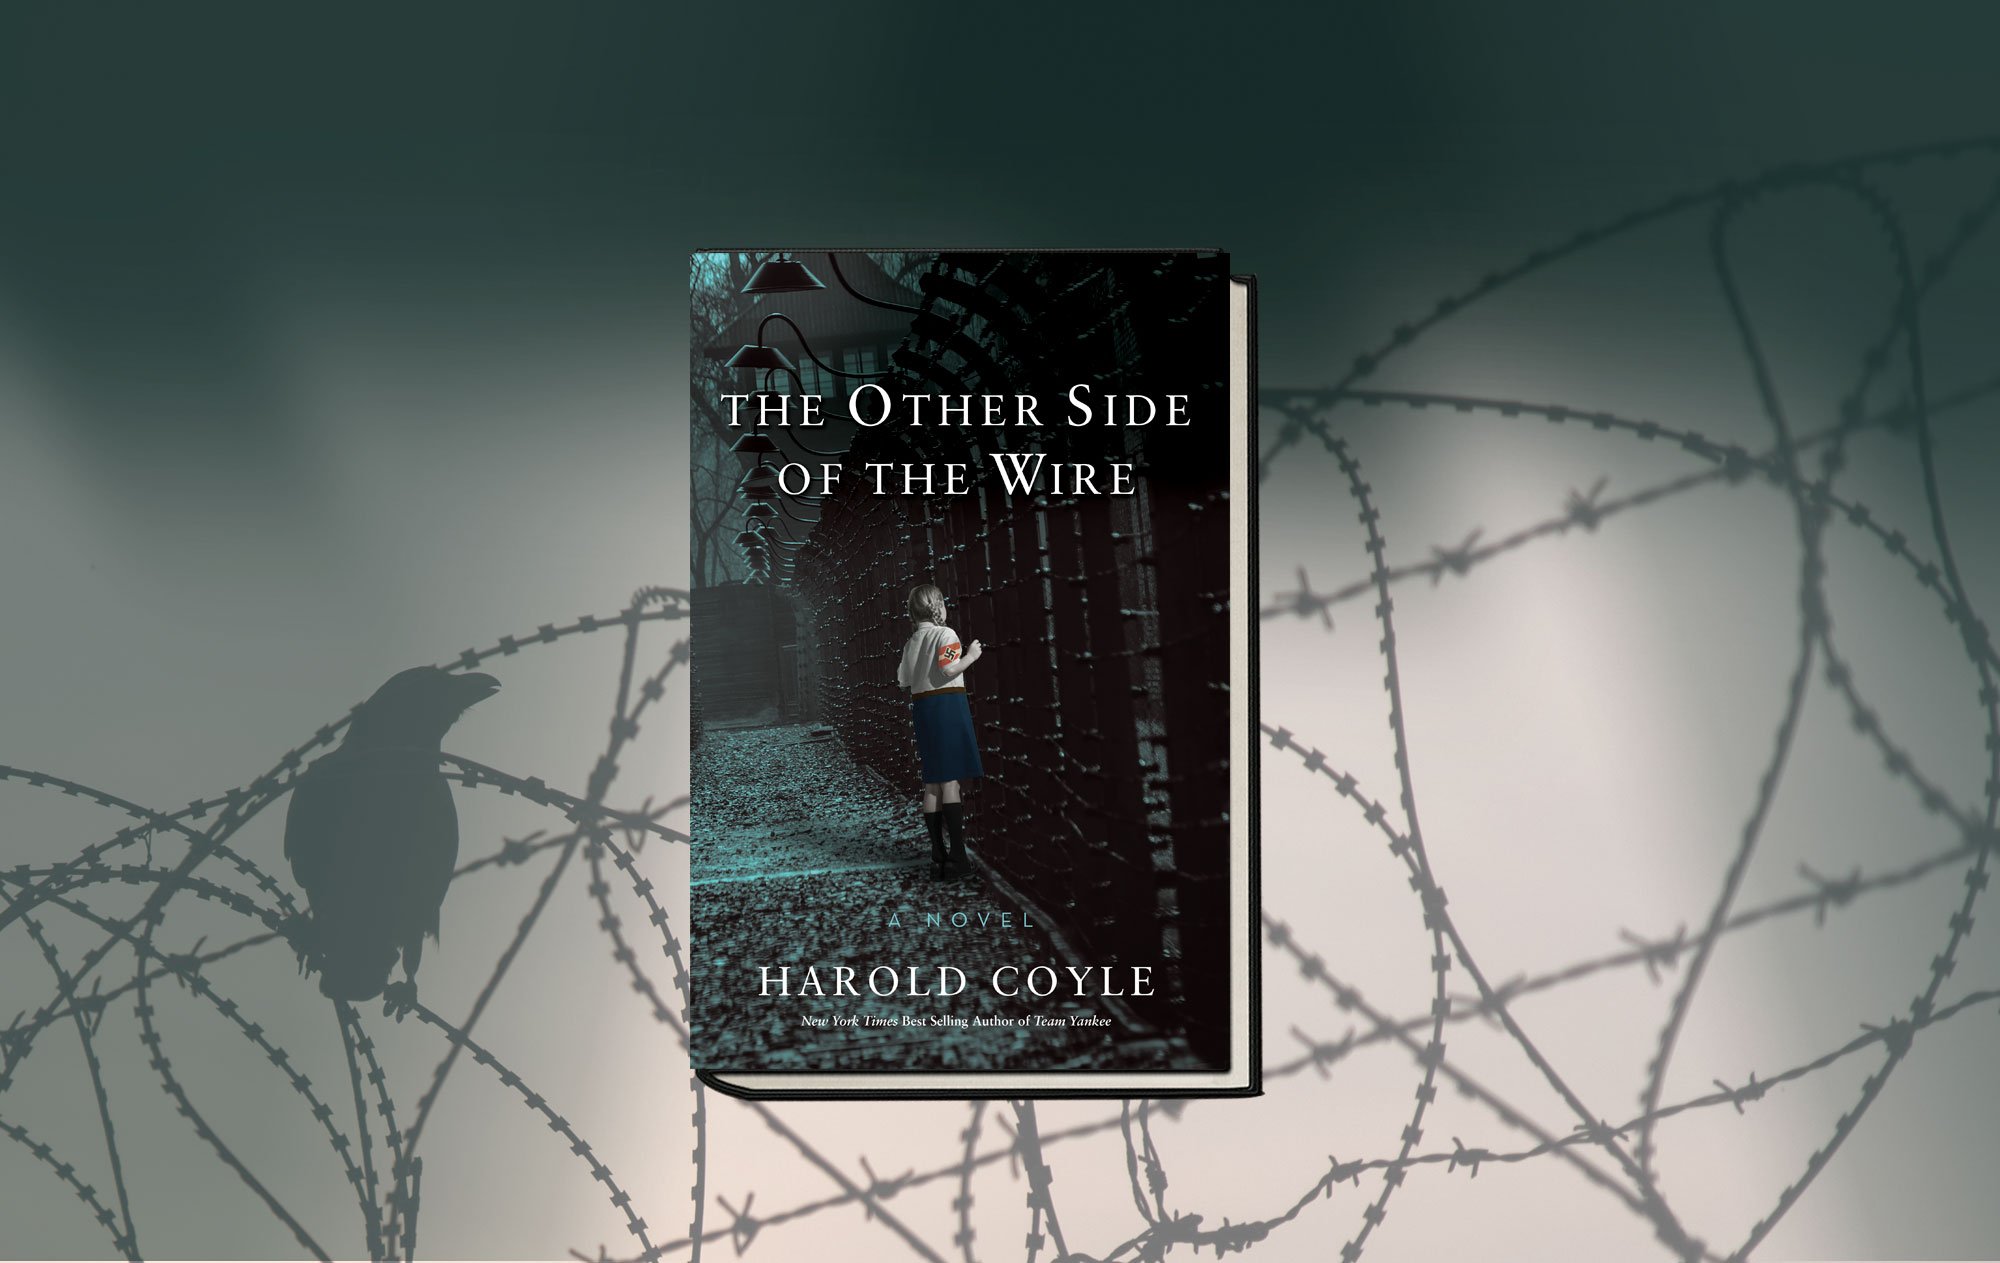 The Other Side of the Wire